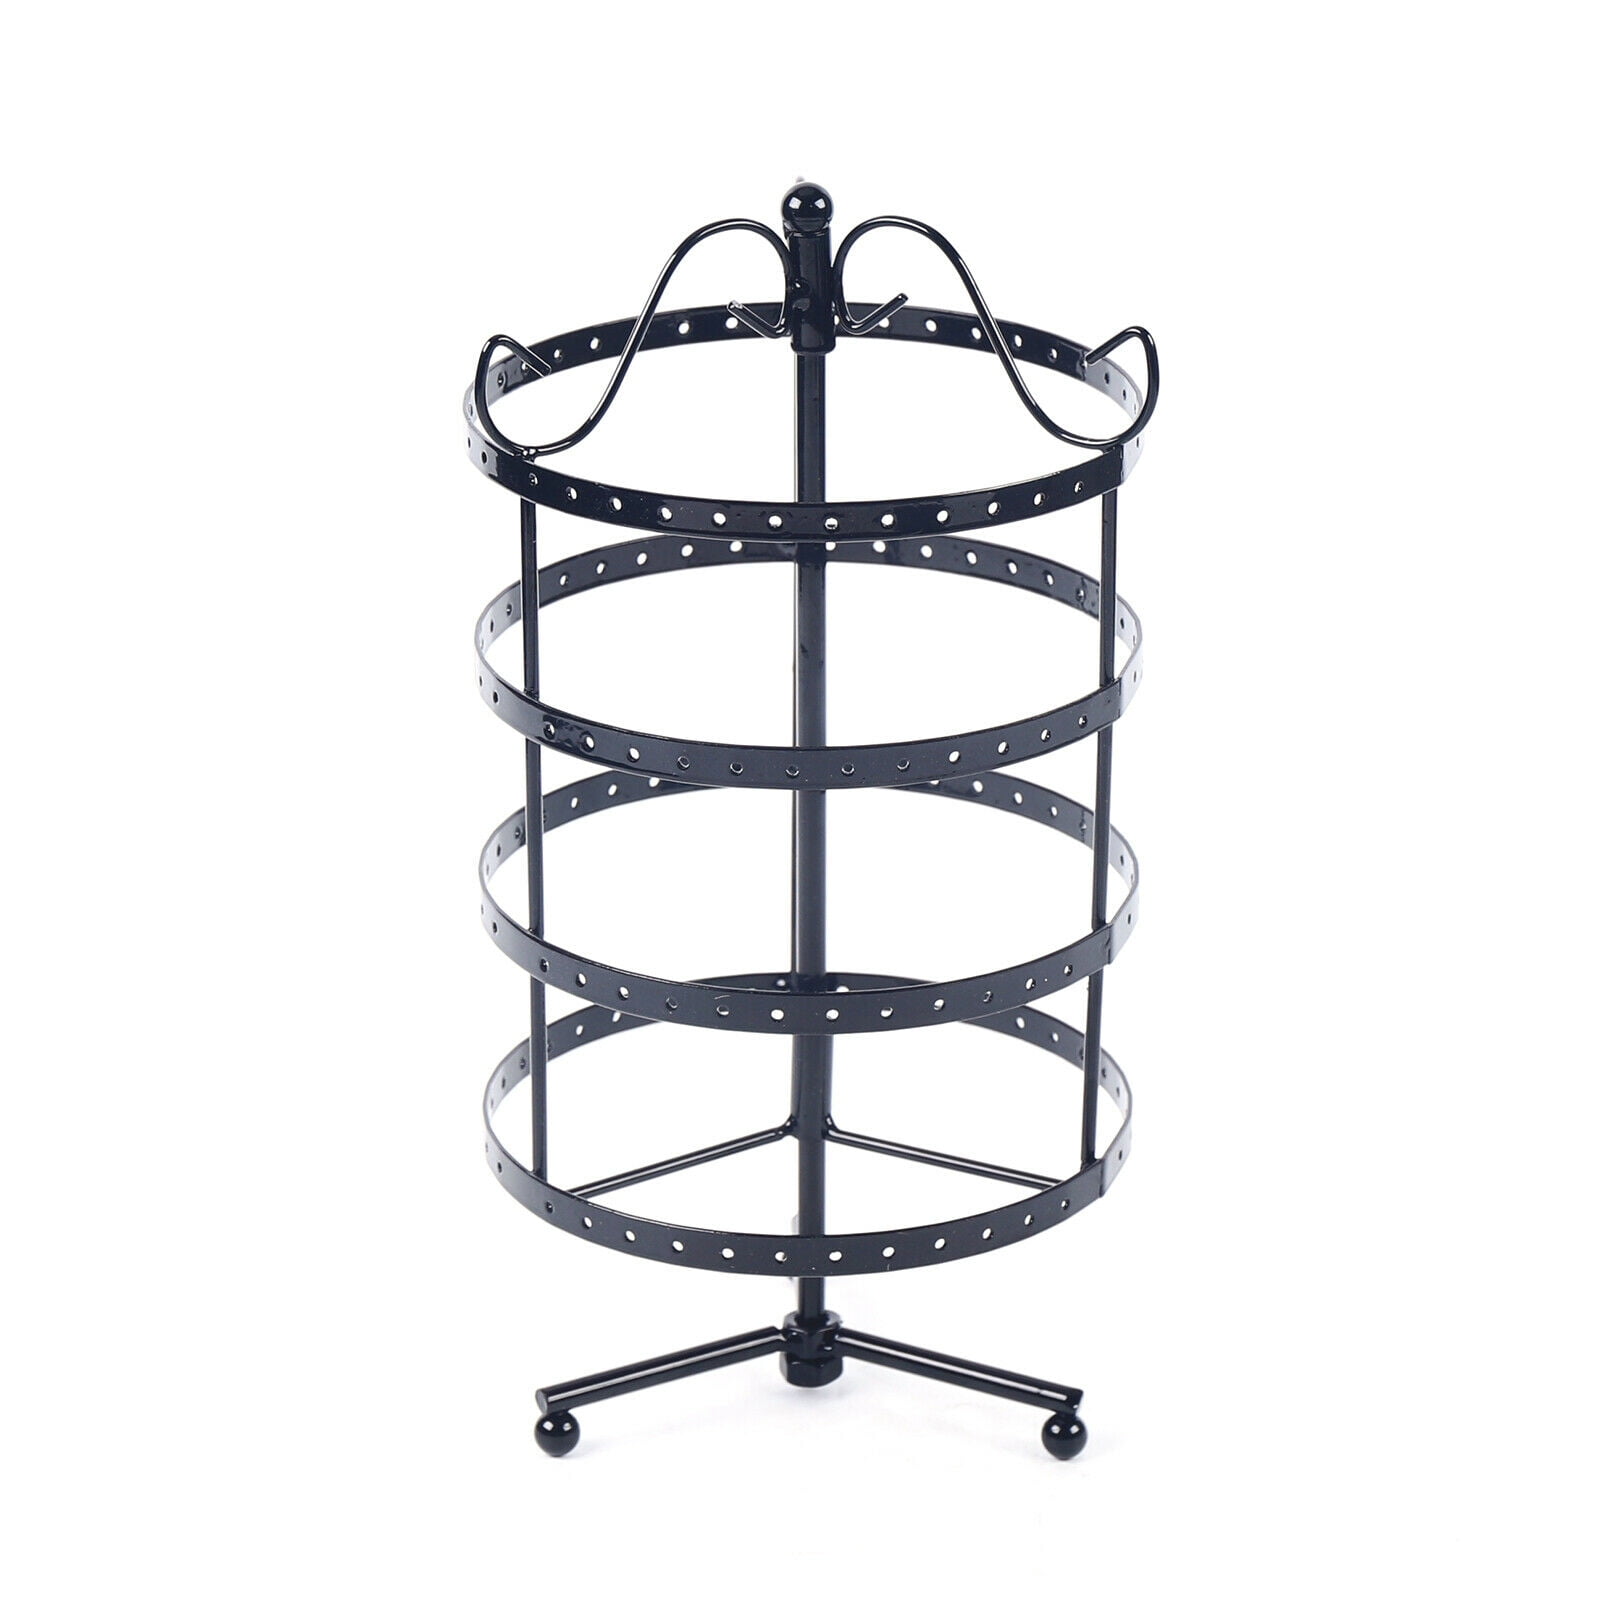 Details about   Rotating Ring Earring Holder Jewelry Stand Display Organizer Necklace Show Rack 